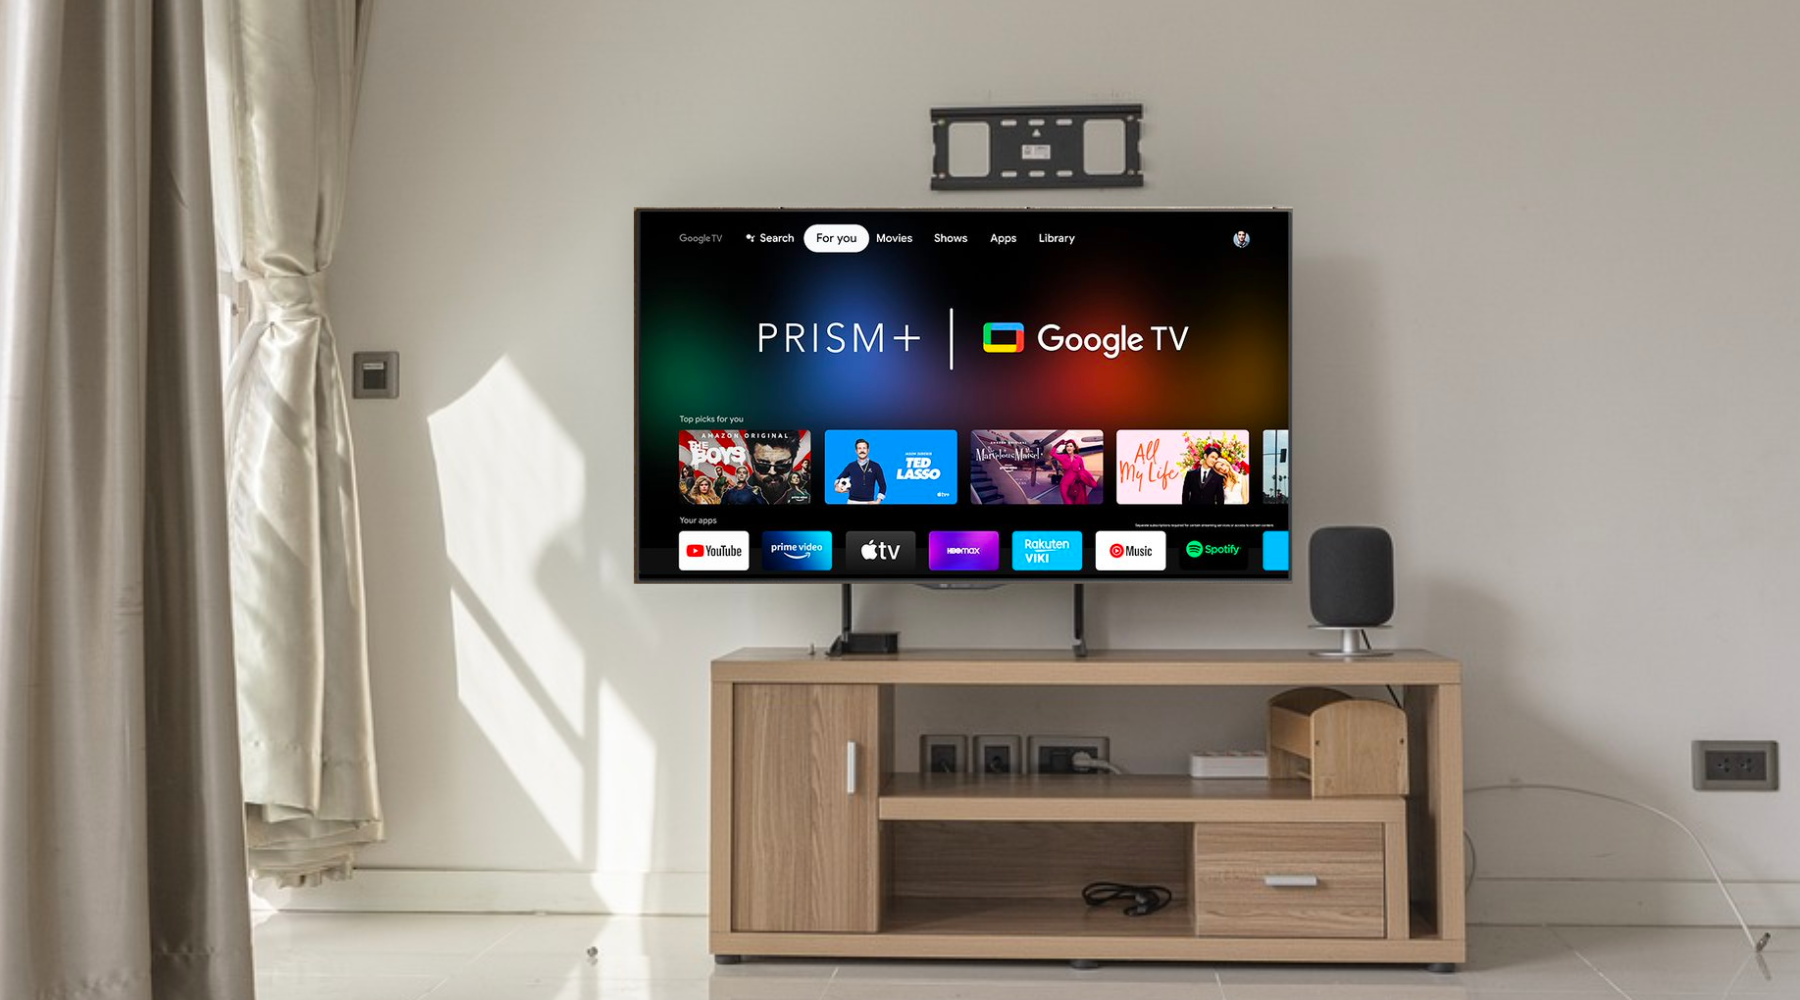 Goodbye Android TV. Hello Google TV - 5 Things You Need to Know